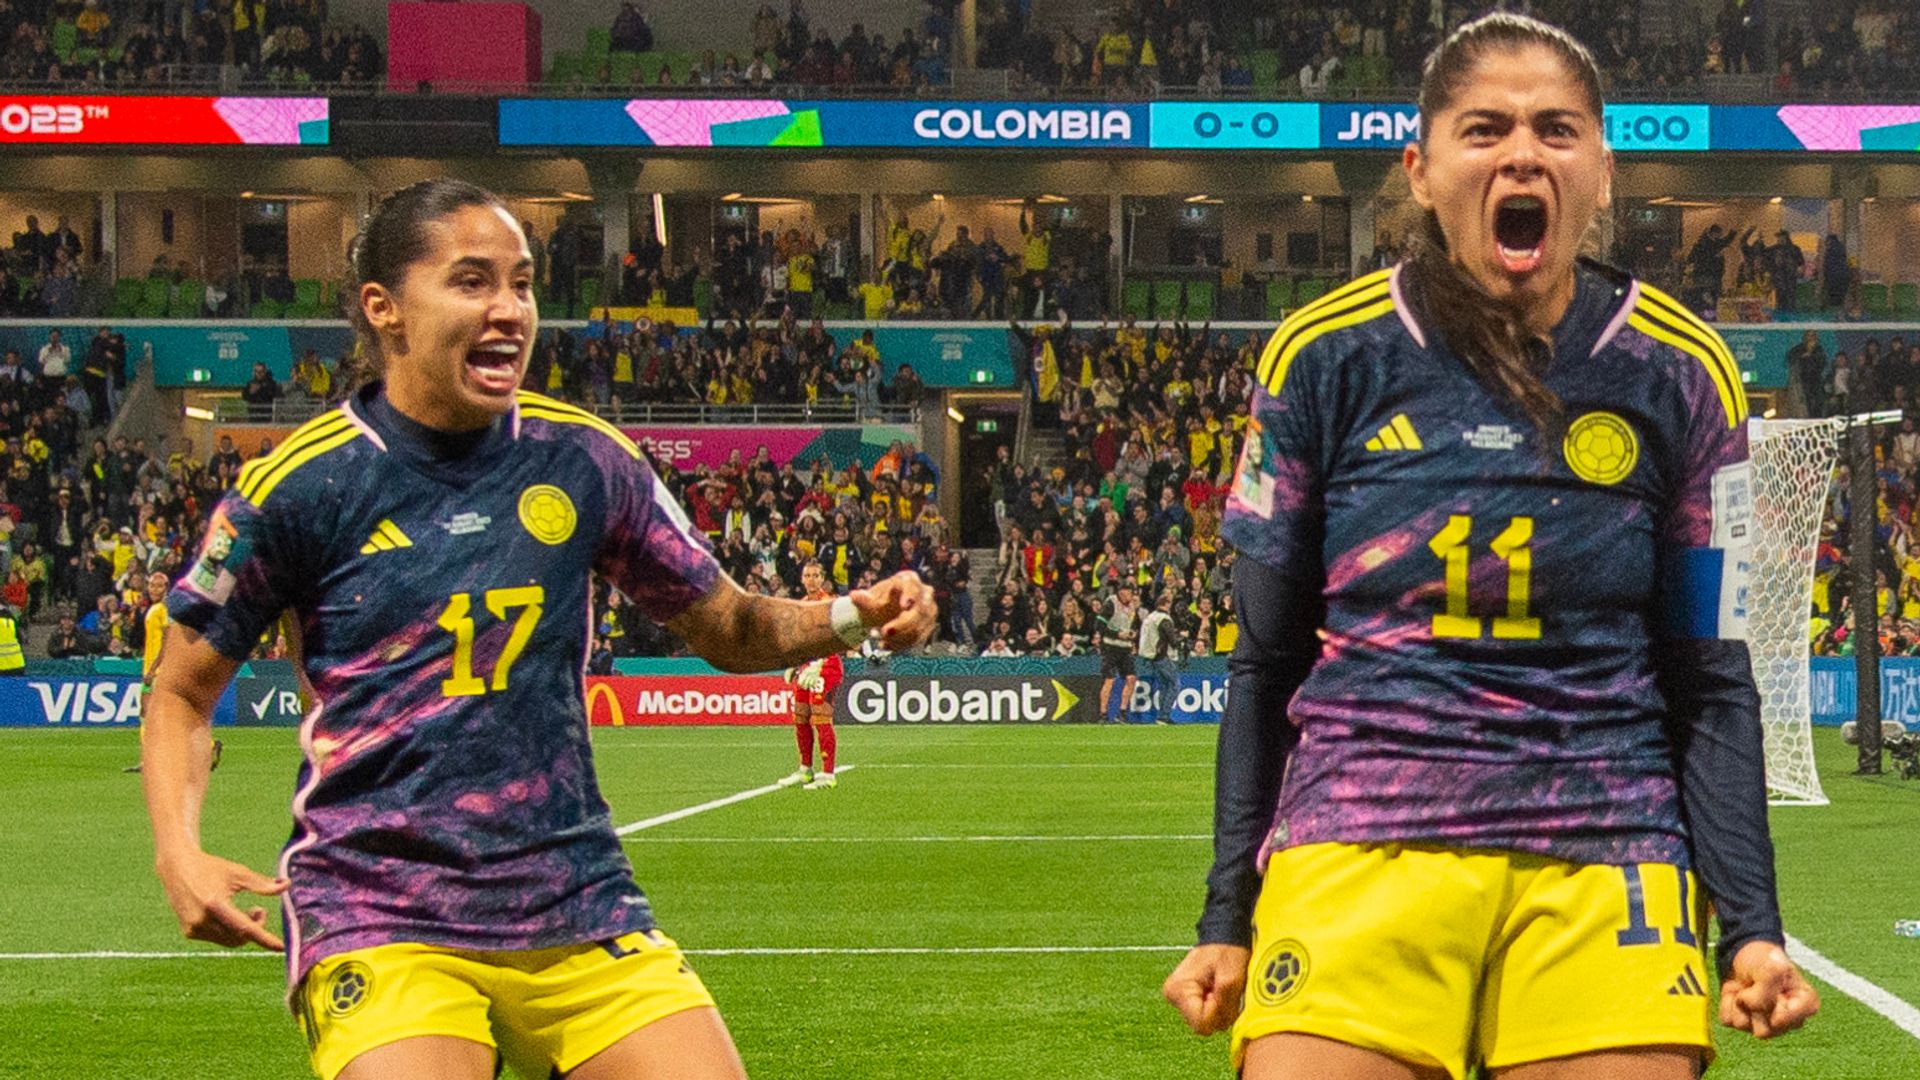 Sublime Usme goal sees Colombia set up QF tie with England